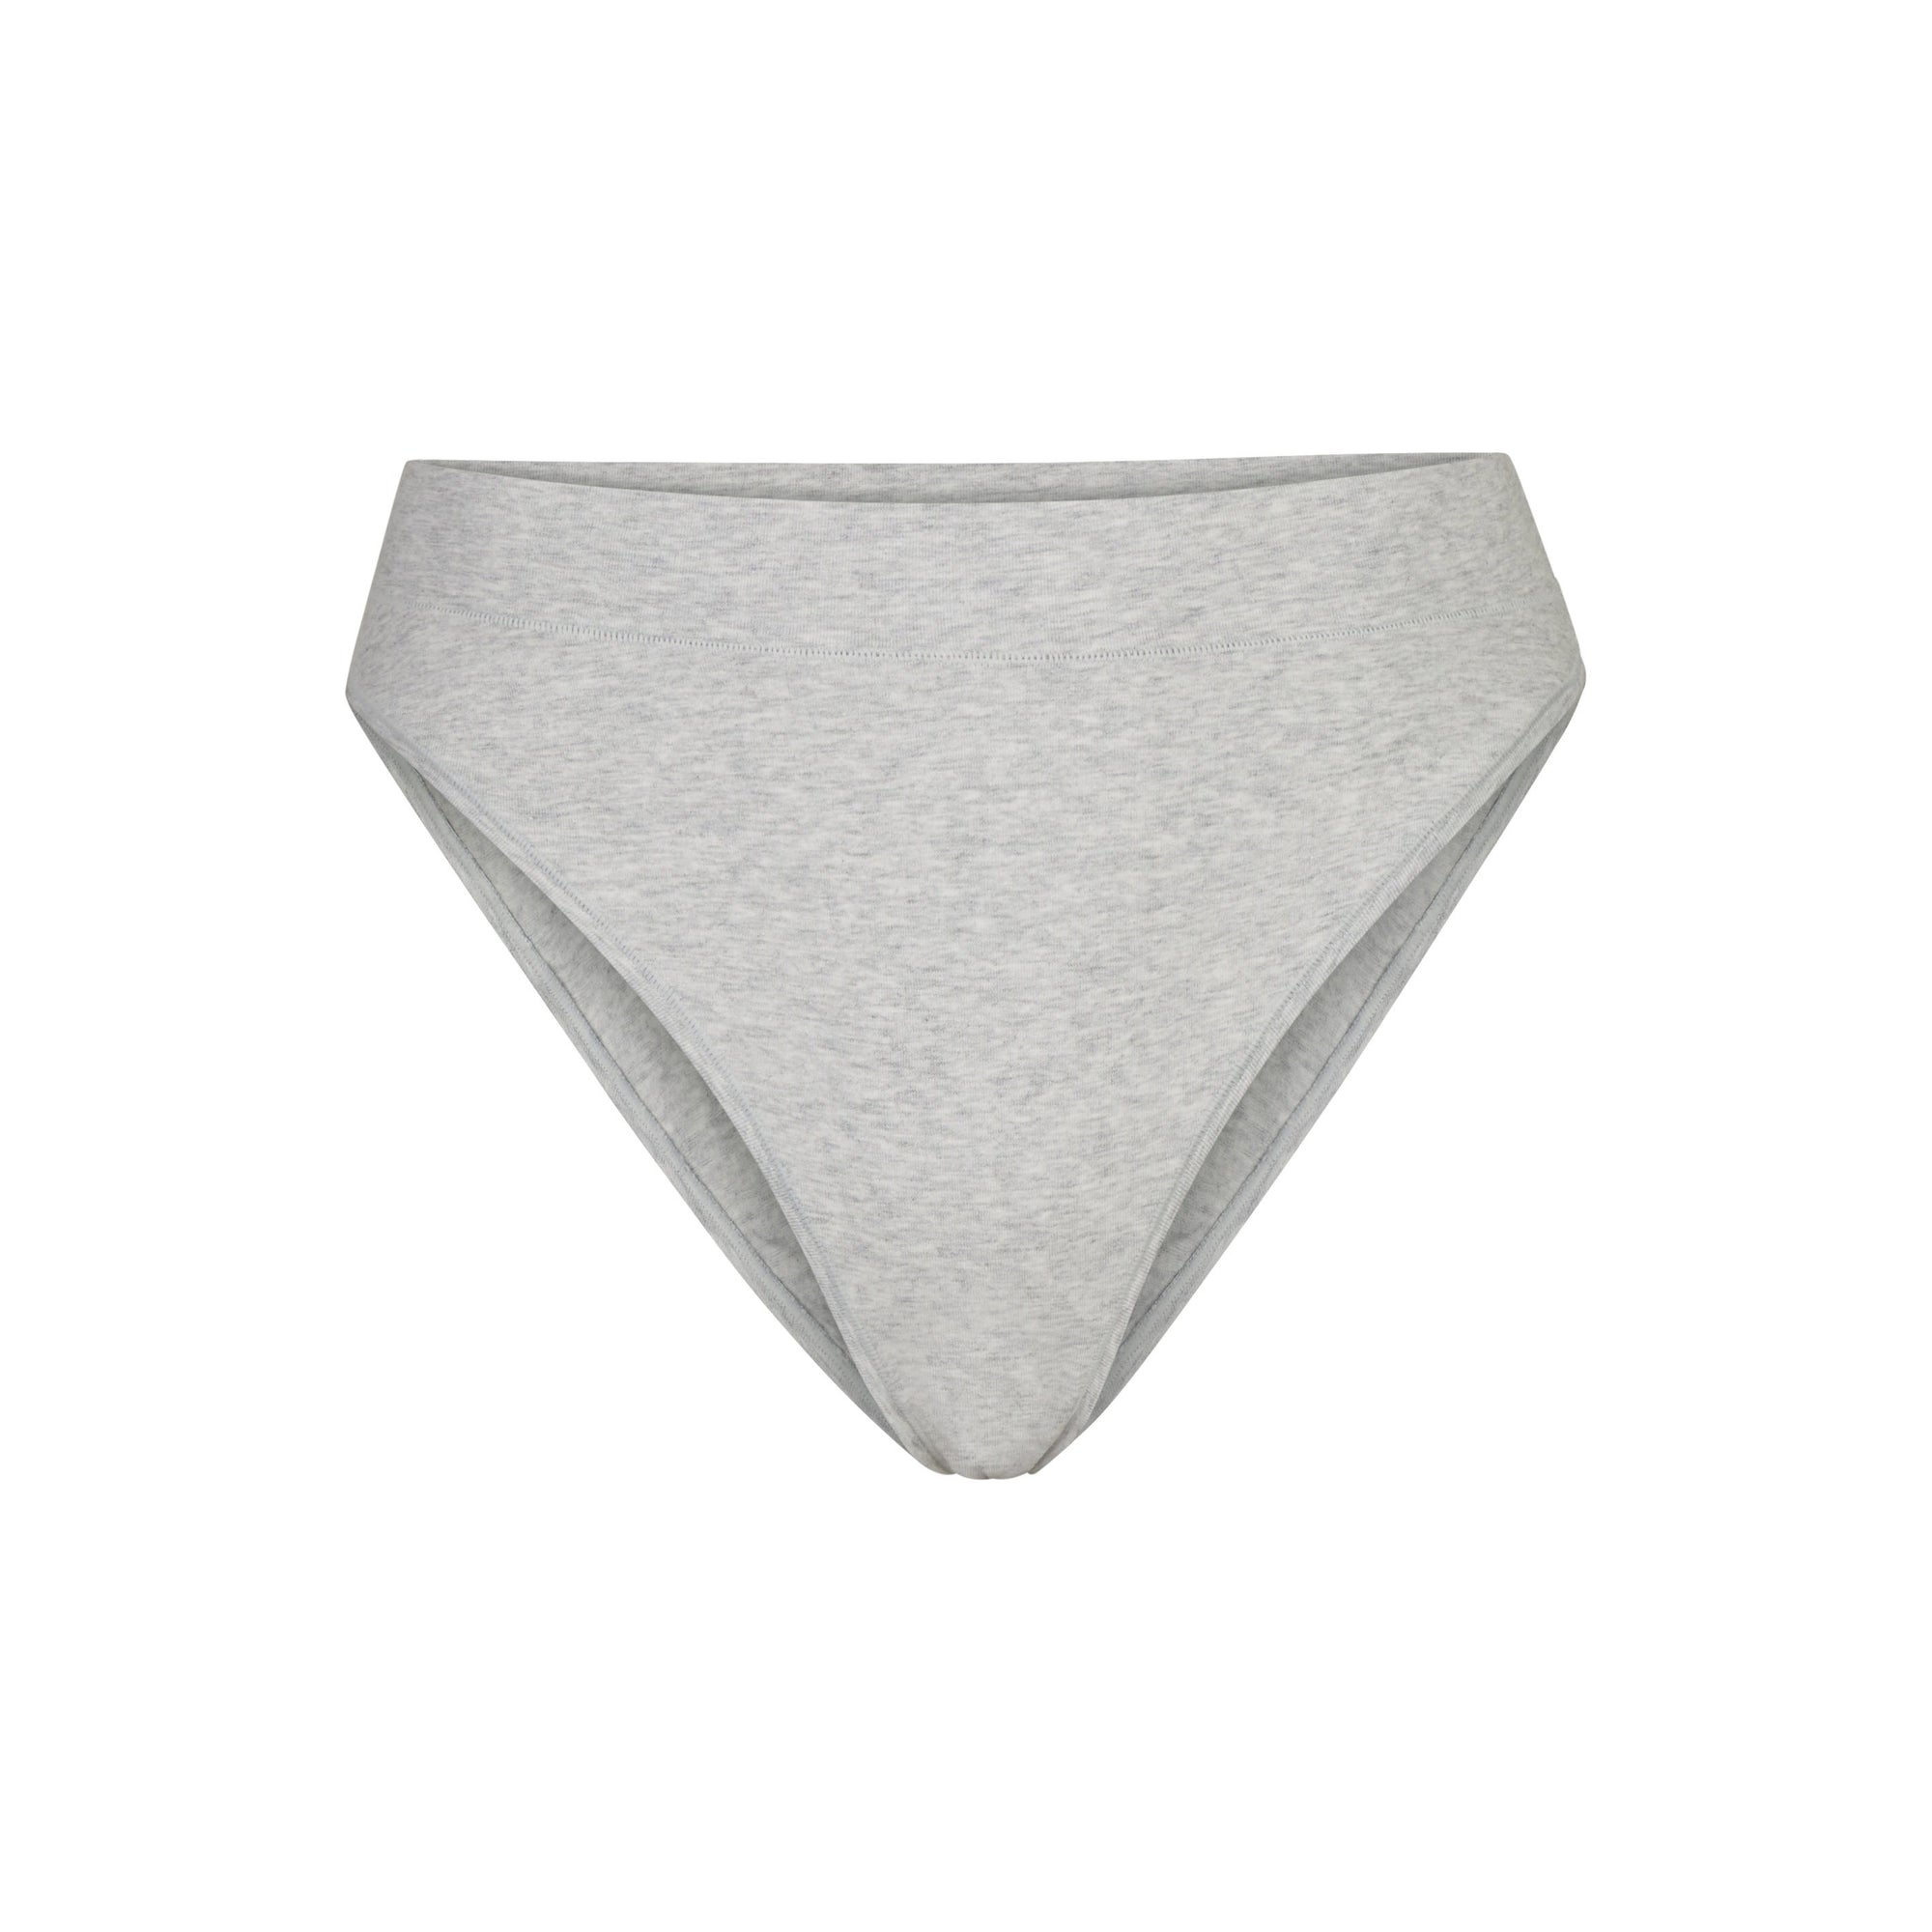 SKIMS - The Cotton Jersey Underwire Bra and Cheeky Tanga in Deep